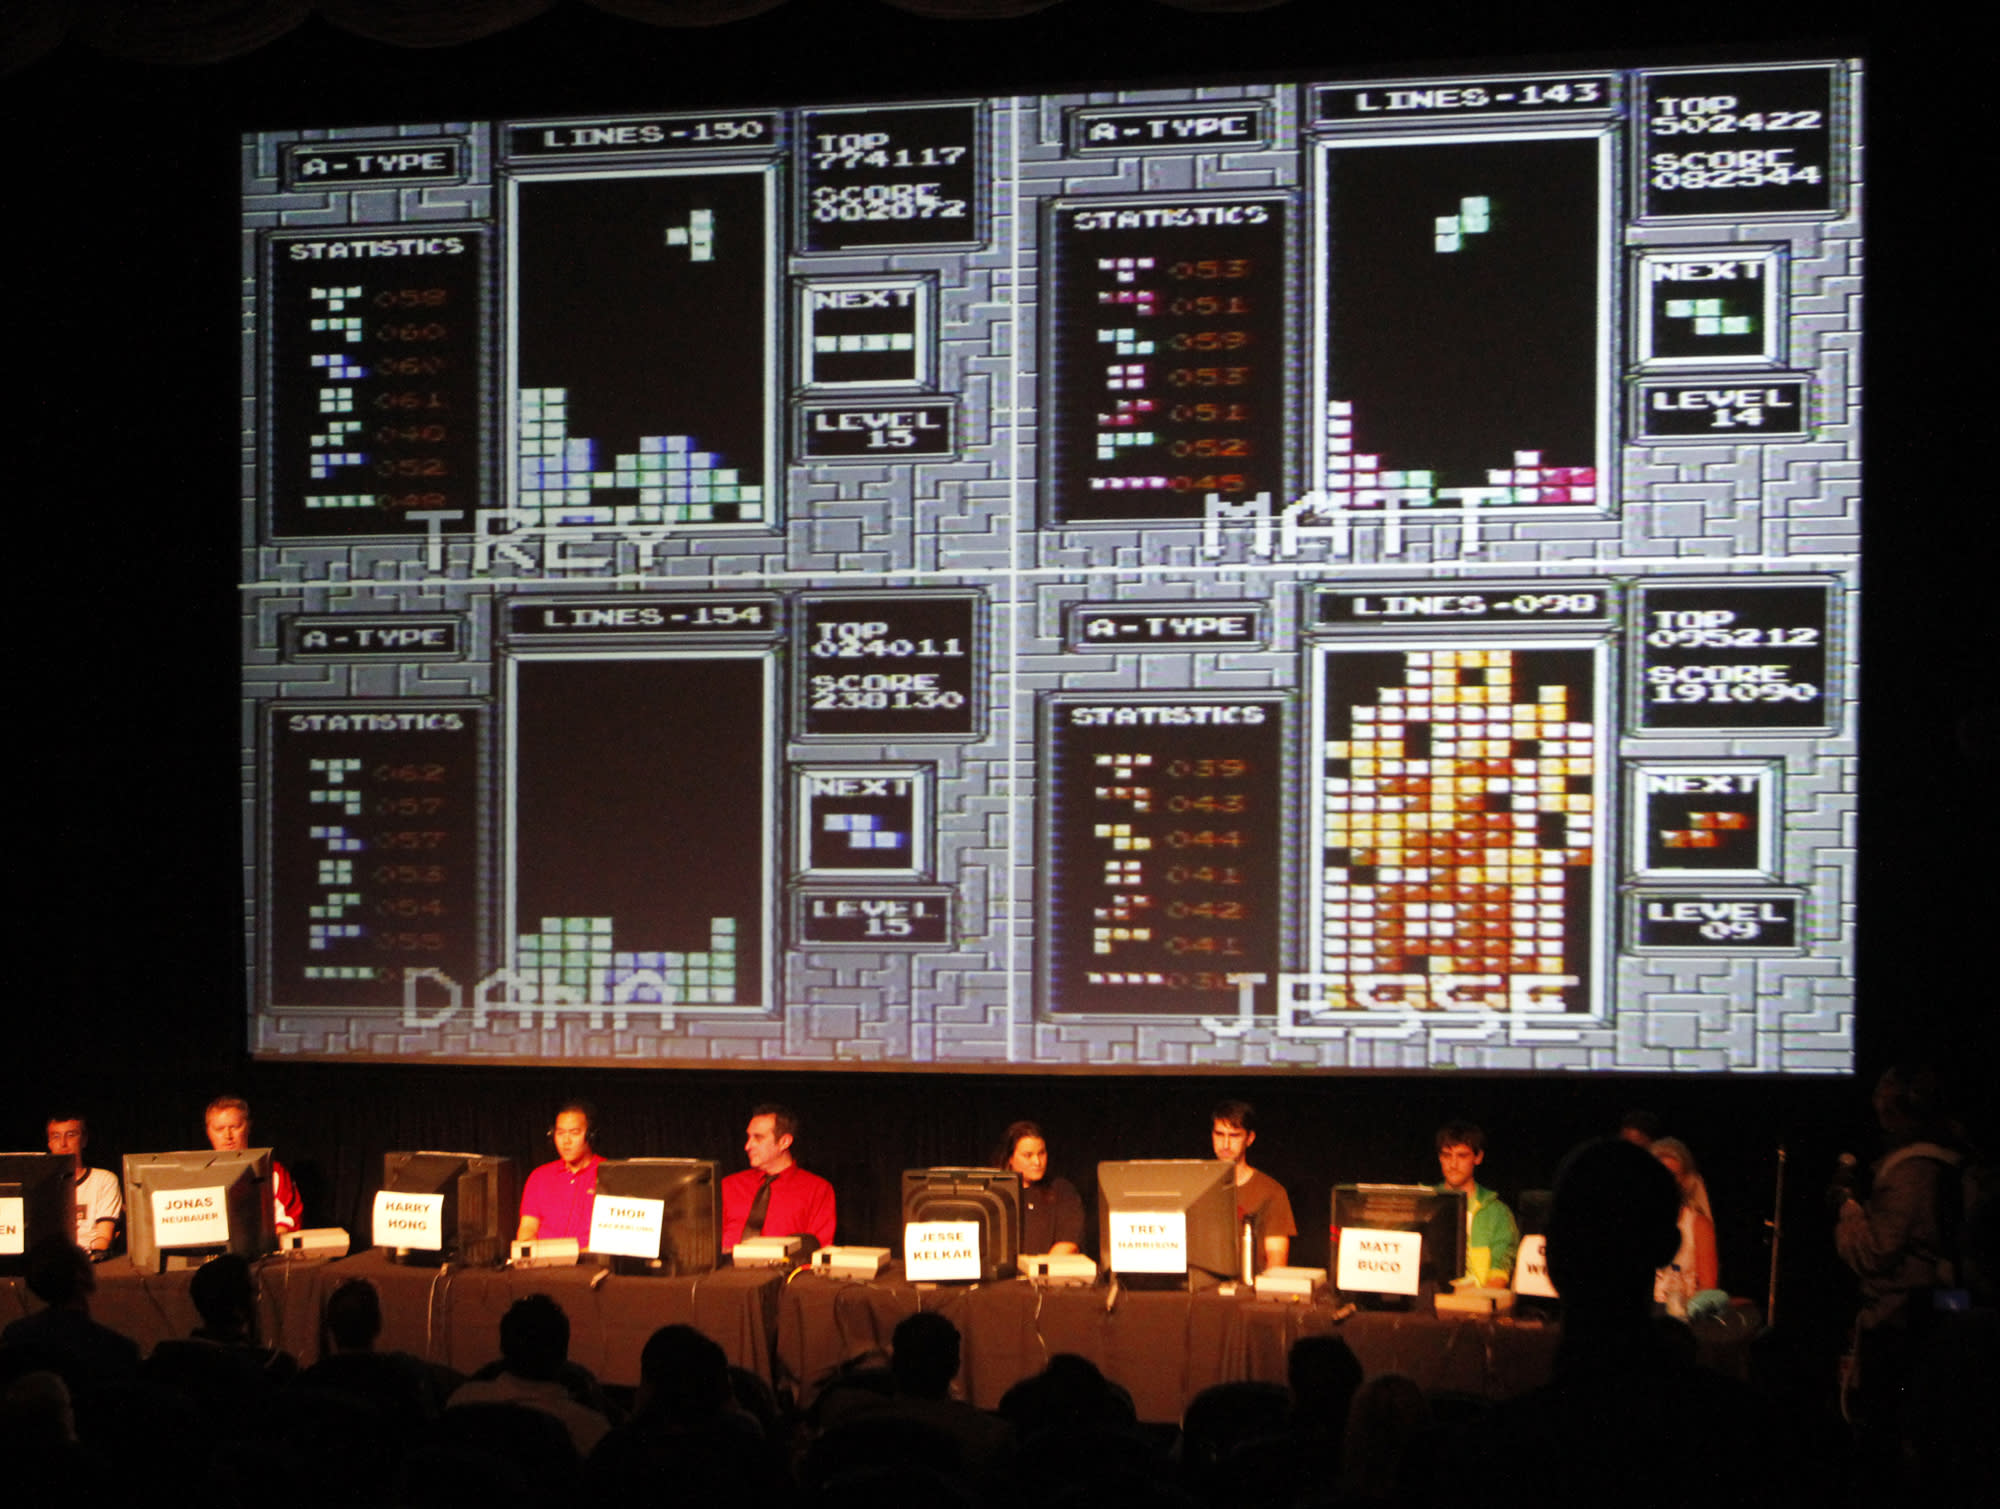 Classic Tetris is at a crucial crossroads. Engadget